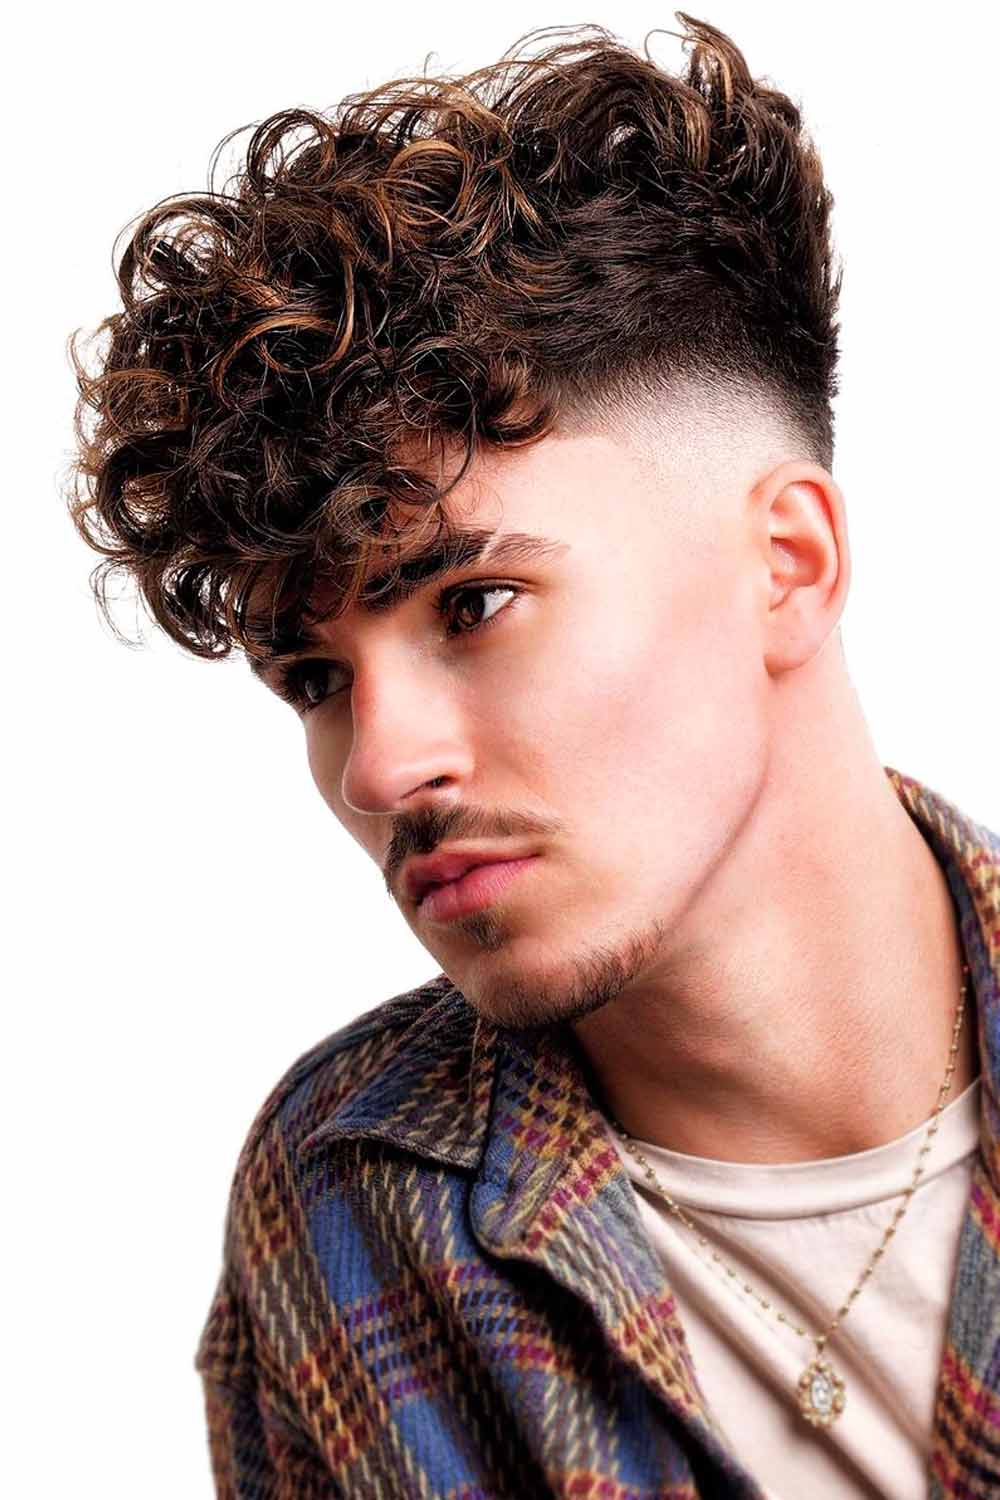 Taper Fade with Highlights #taperfadecurlyhair #taperfade #curlyhair #taper #fade